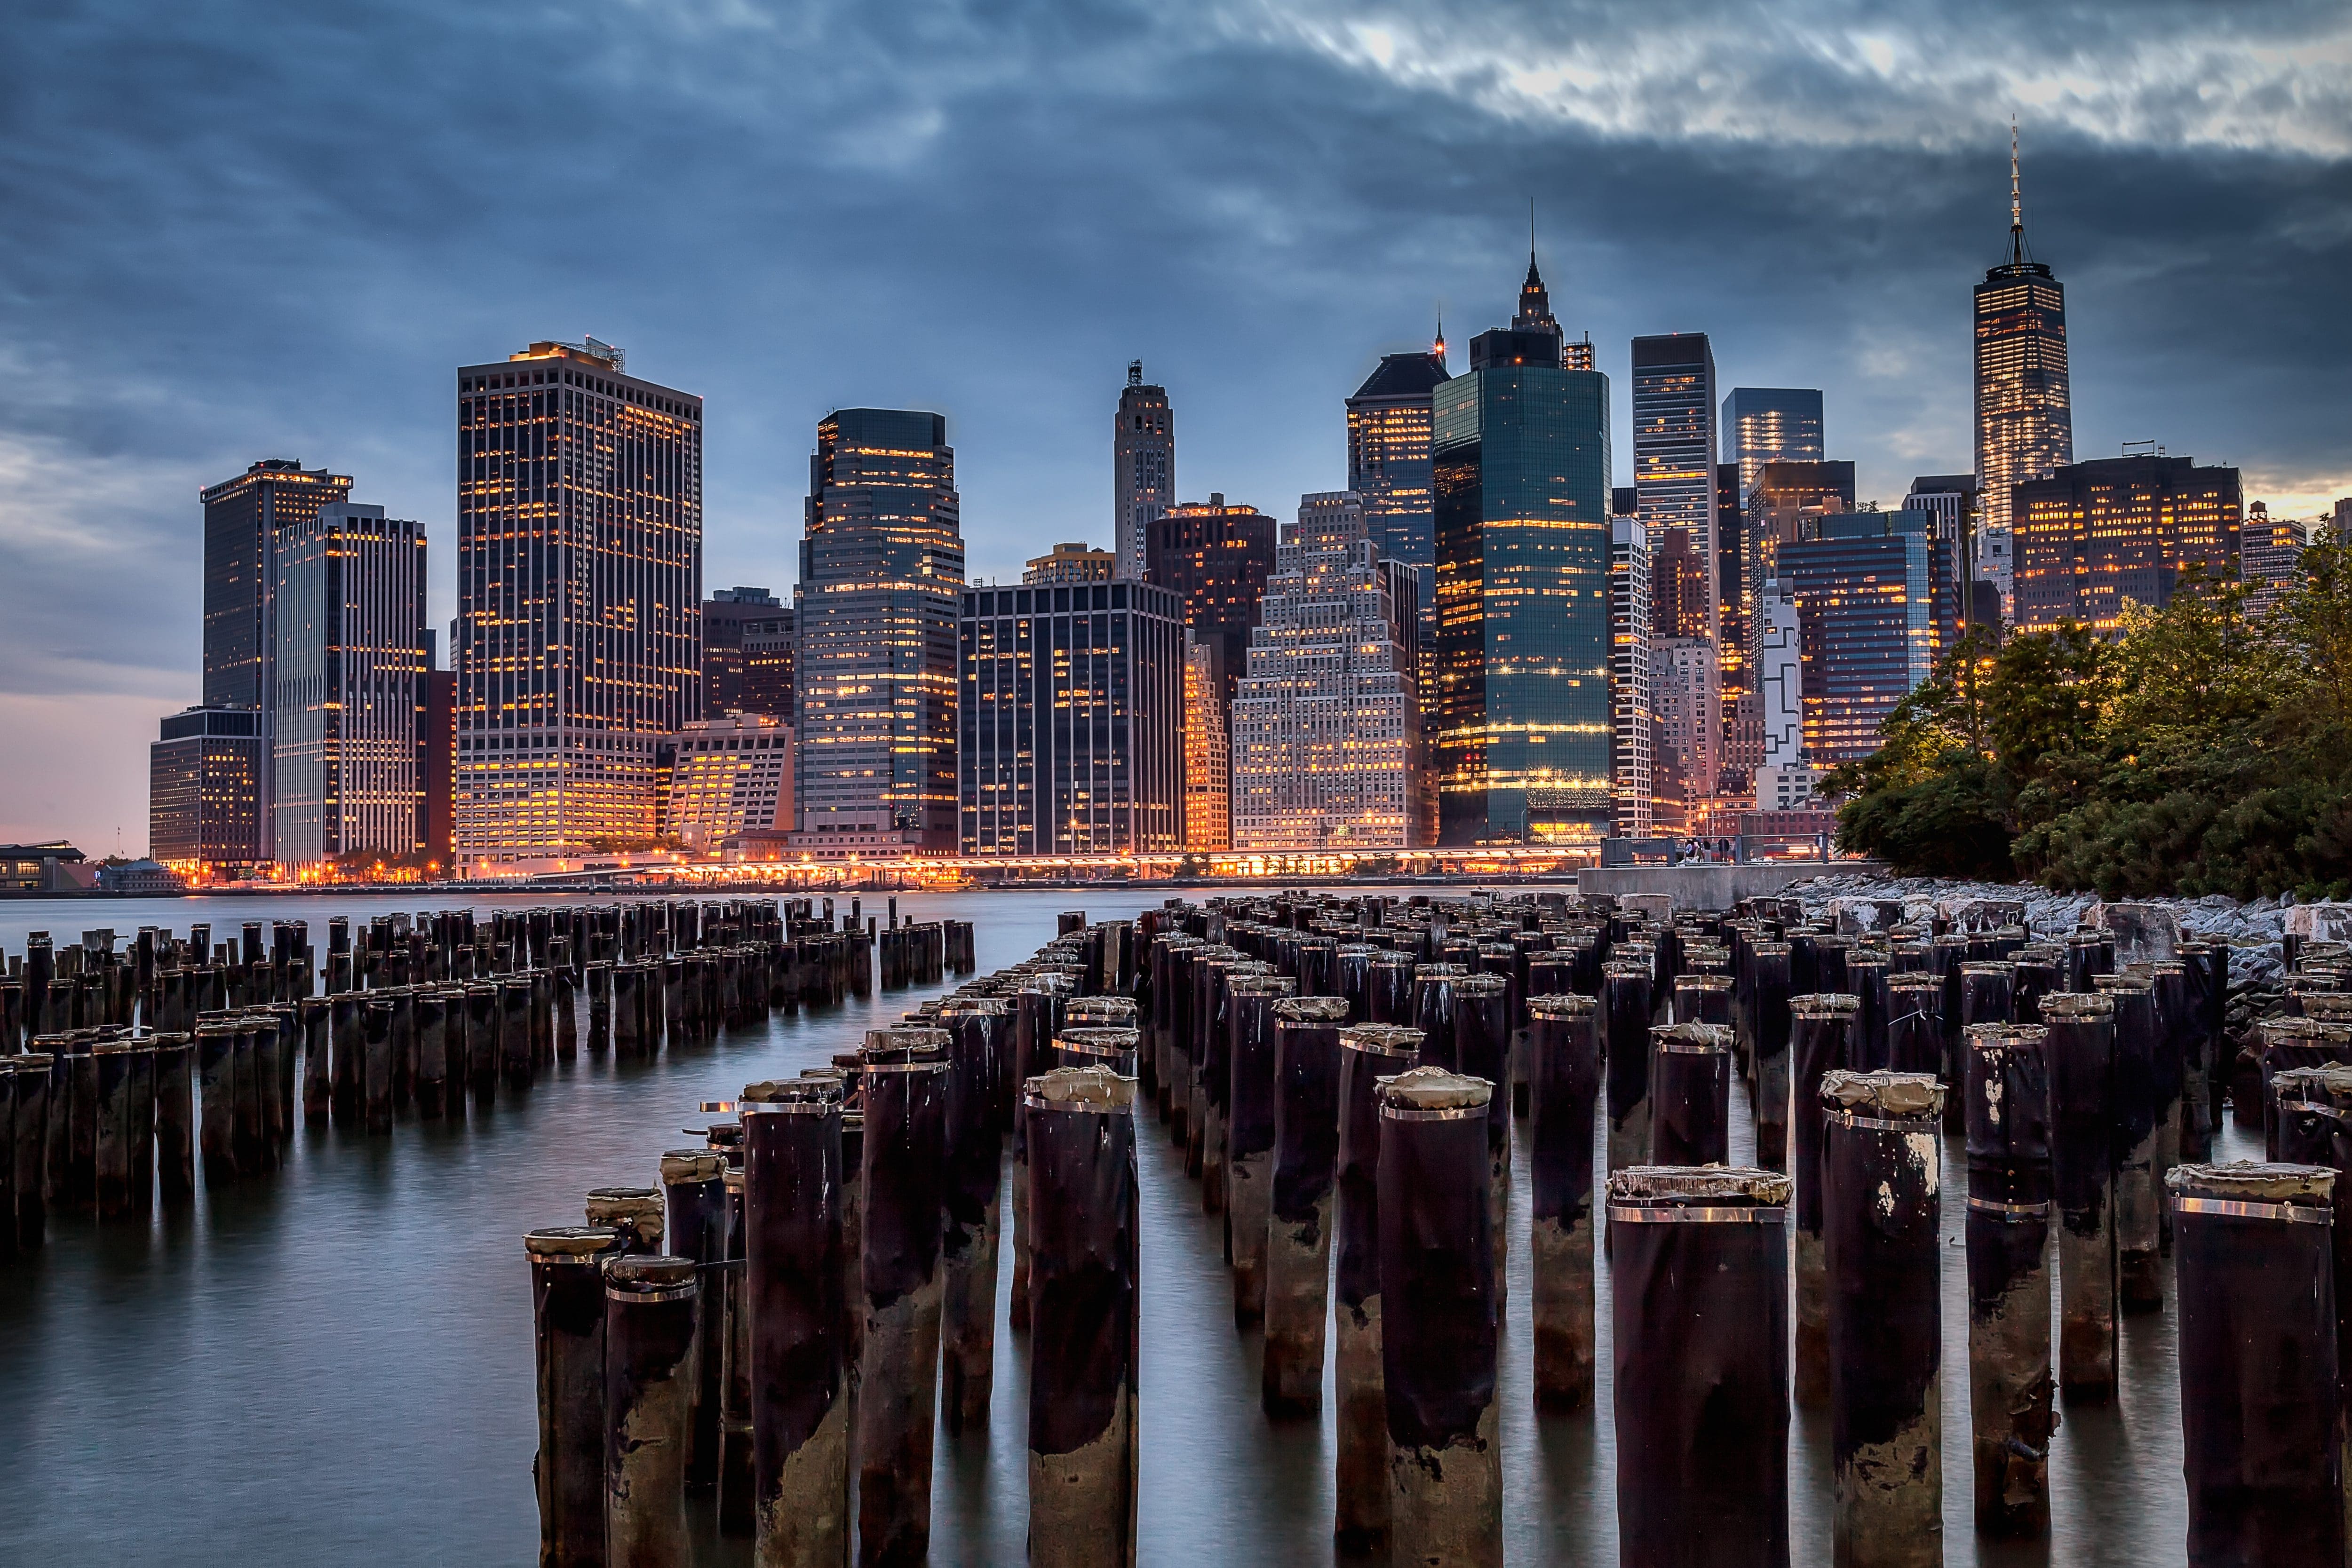 View of the New York skyline at dusk.